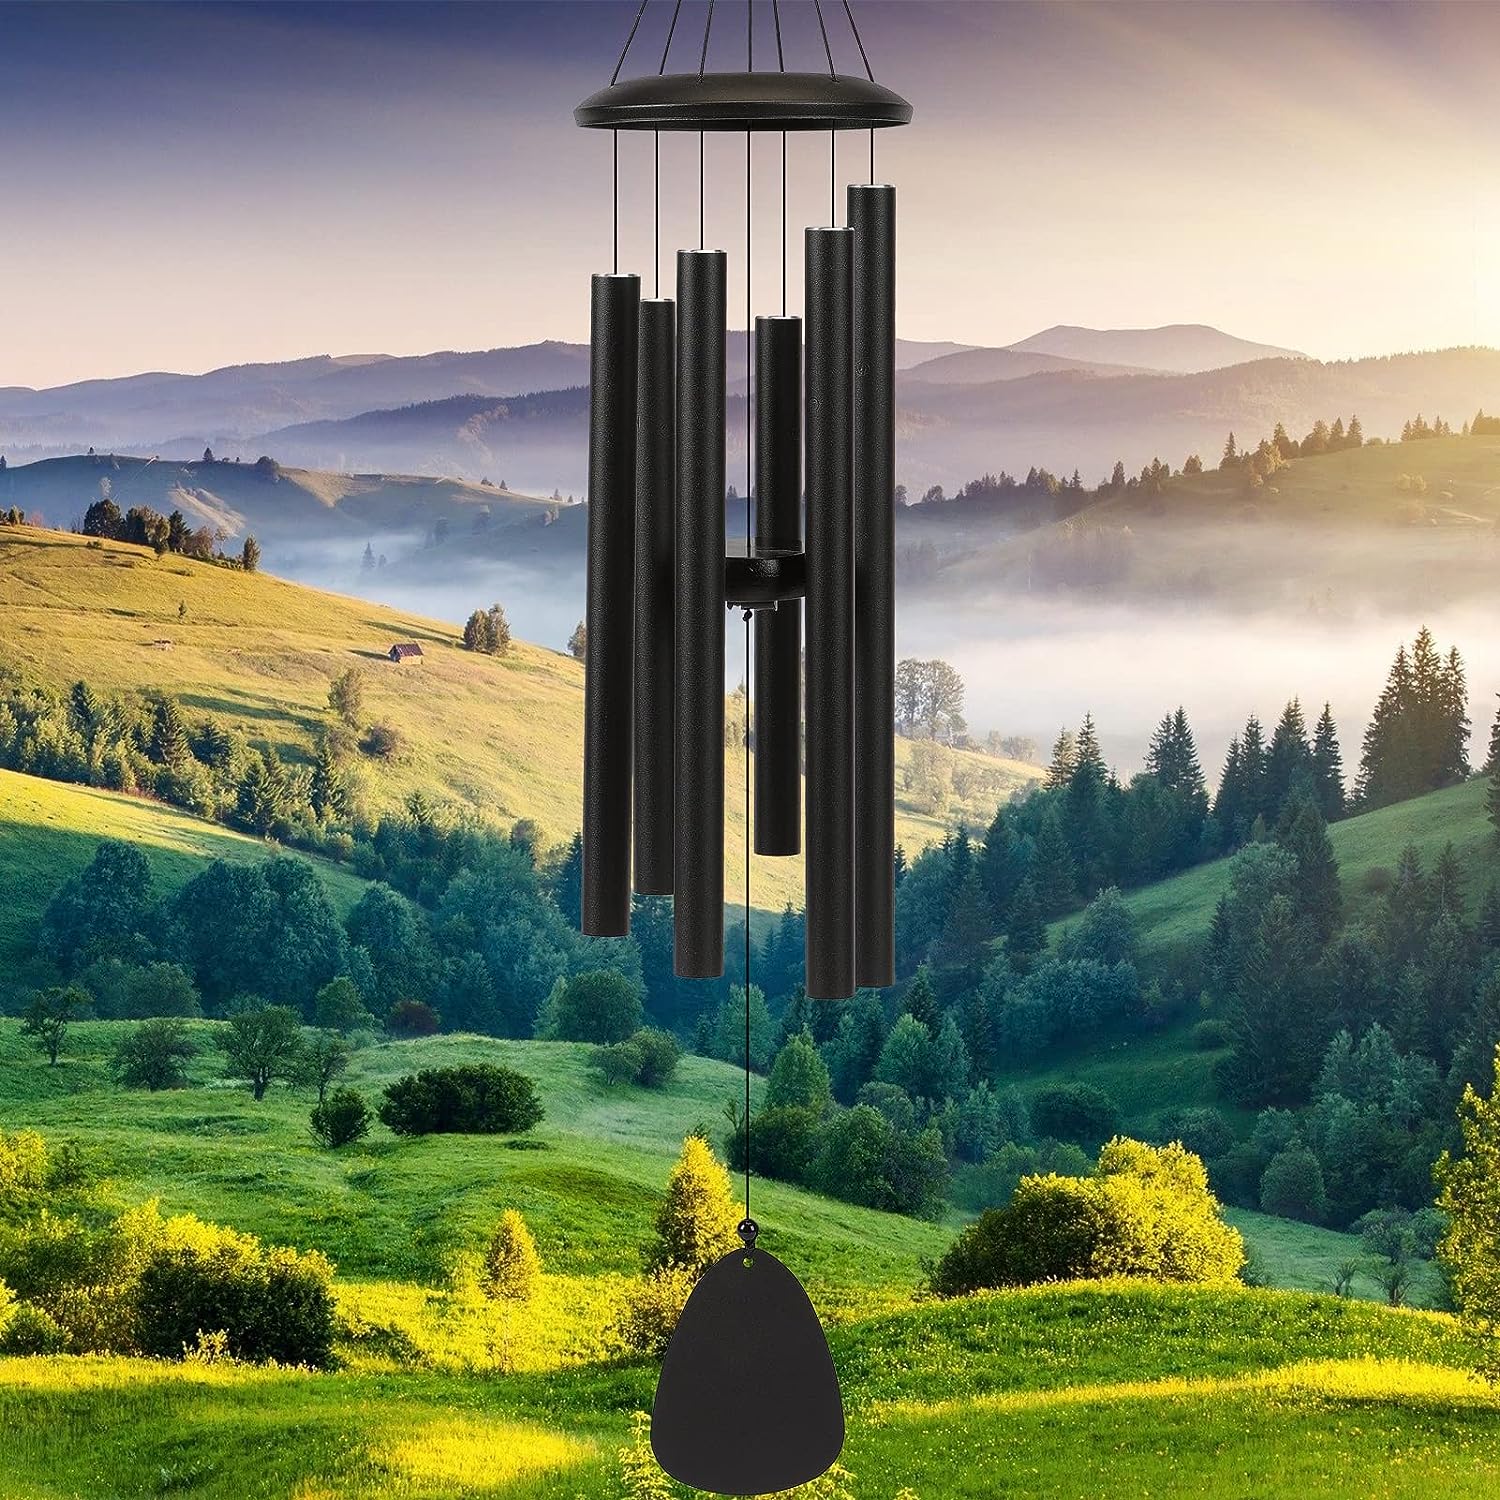 FSVGYY Wind-Chimes-Outdoor-Large-Decor, Deep Tone Soothing Melodic Tones Windchimes